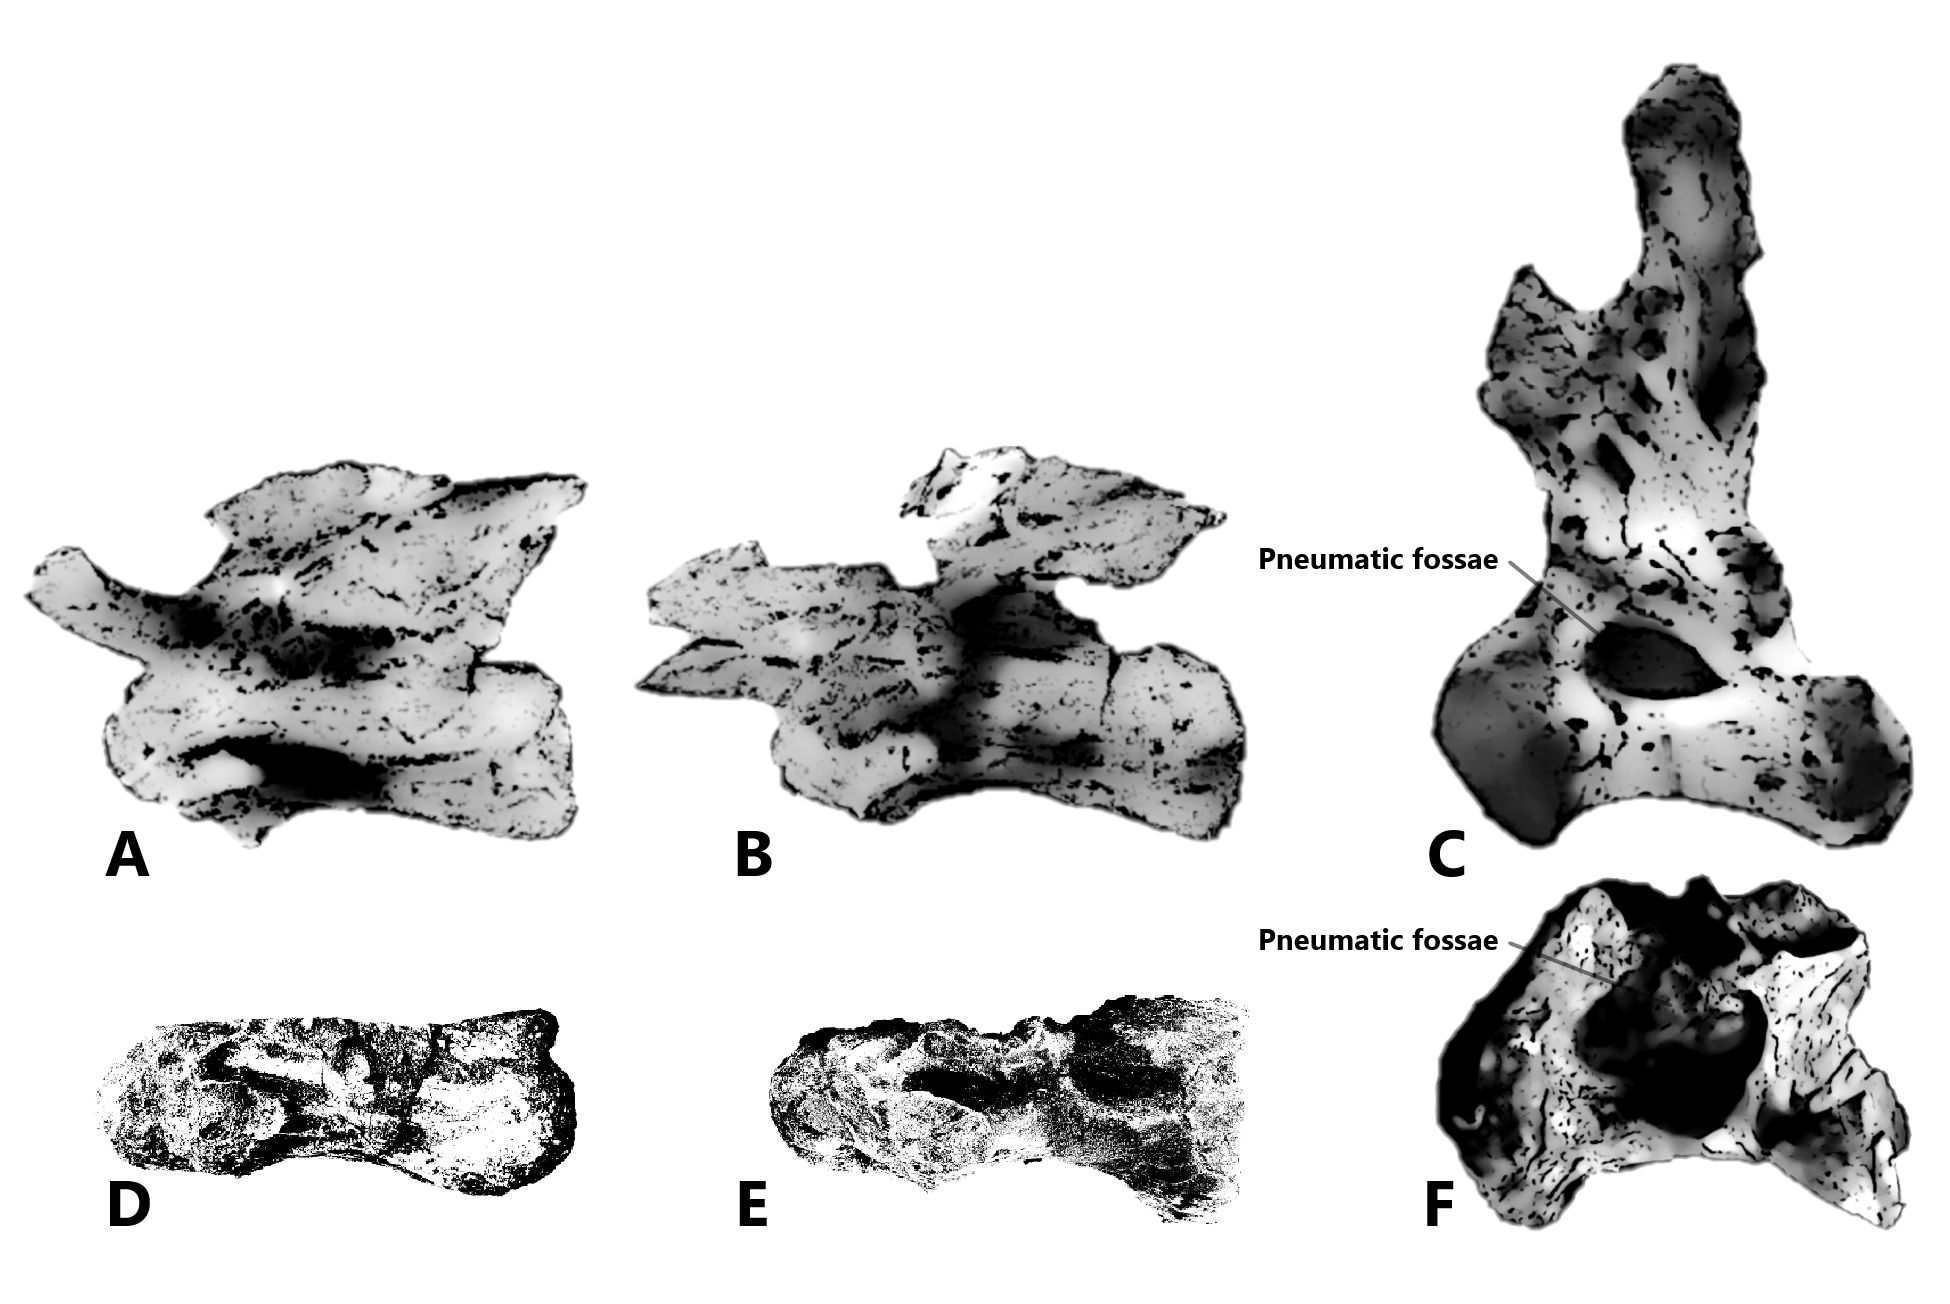 Comparison of Spinosaurid vertebra with Sauropod. From top left to bottom right: A. 3rd cervical vertebra (MPEF-PV 3301/12)[11] of Bagualia alba; B. 4th cervical vertebra (MPEF-PV 3301/11)[11] of Bagualia alba; C. Cretaceous Sauropod dorsal vertebra PMU 24708[12]; D. 2nd cervical vertebra (GCE2105098997A) of Spinosaurus dorsojuvencus; E. 5th cervical vertebra (GCE2104138334) of Spinosaurus dorsojuvencus; and F. Anterior dorsal vertebra of Spinosaurus aegyptiacus neotype (FSAC-KK 11888)[4].